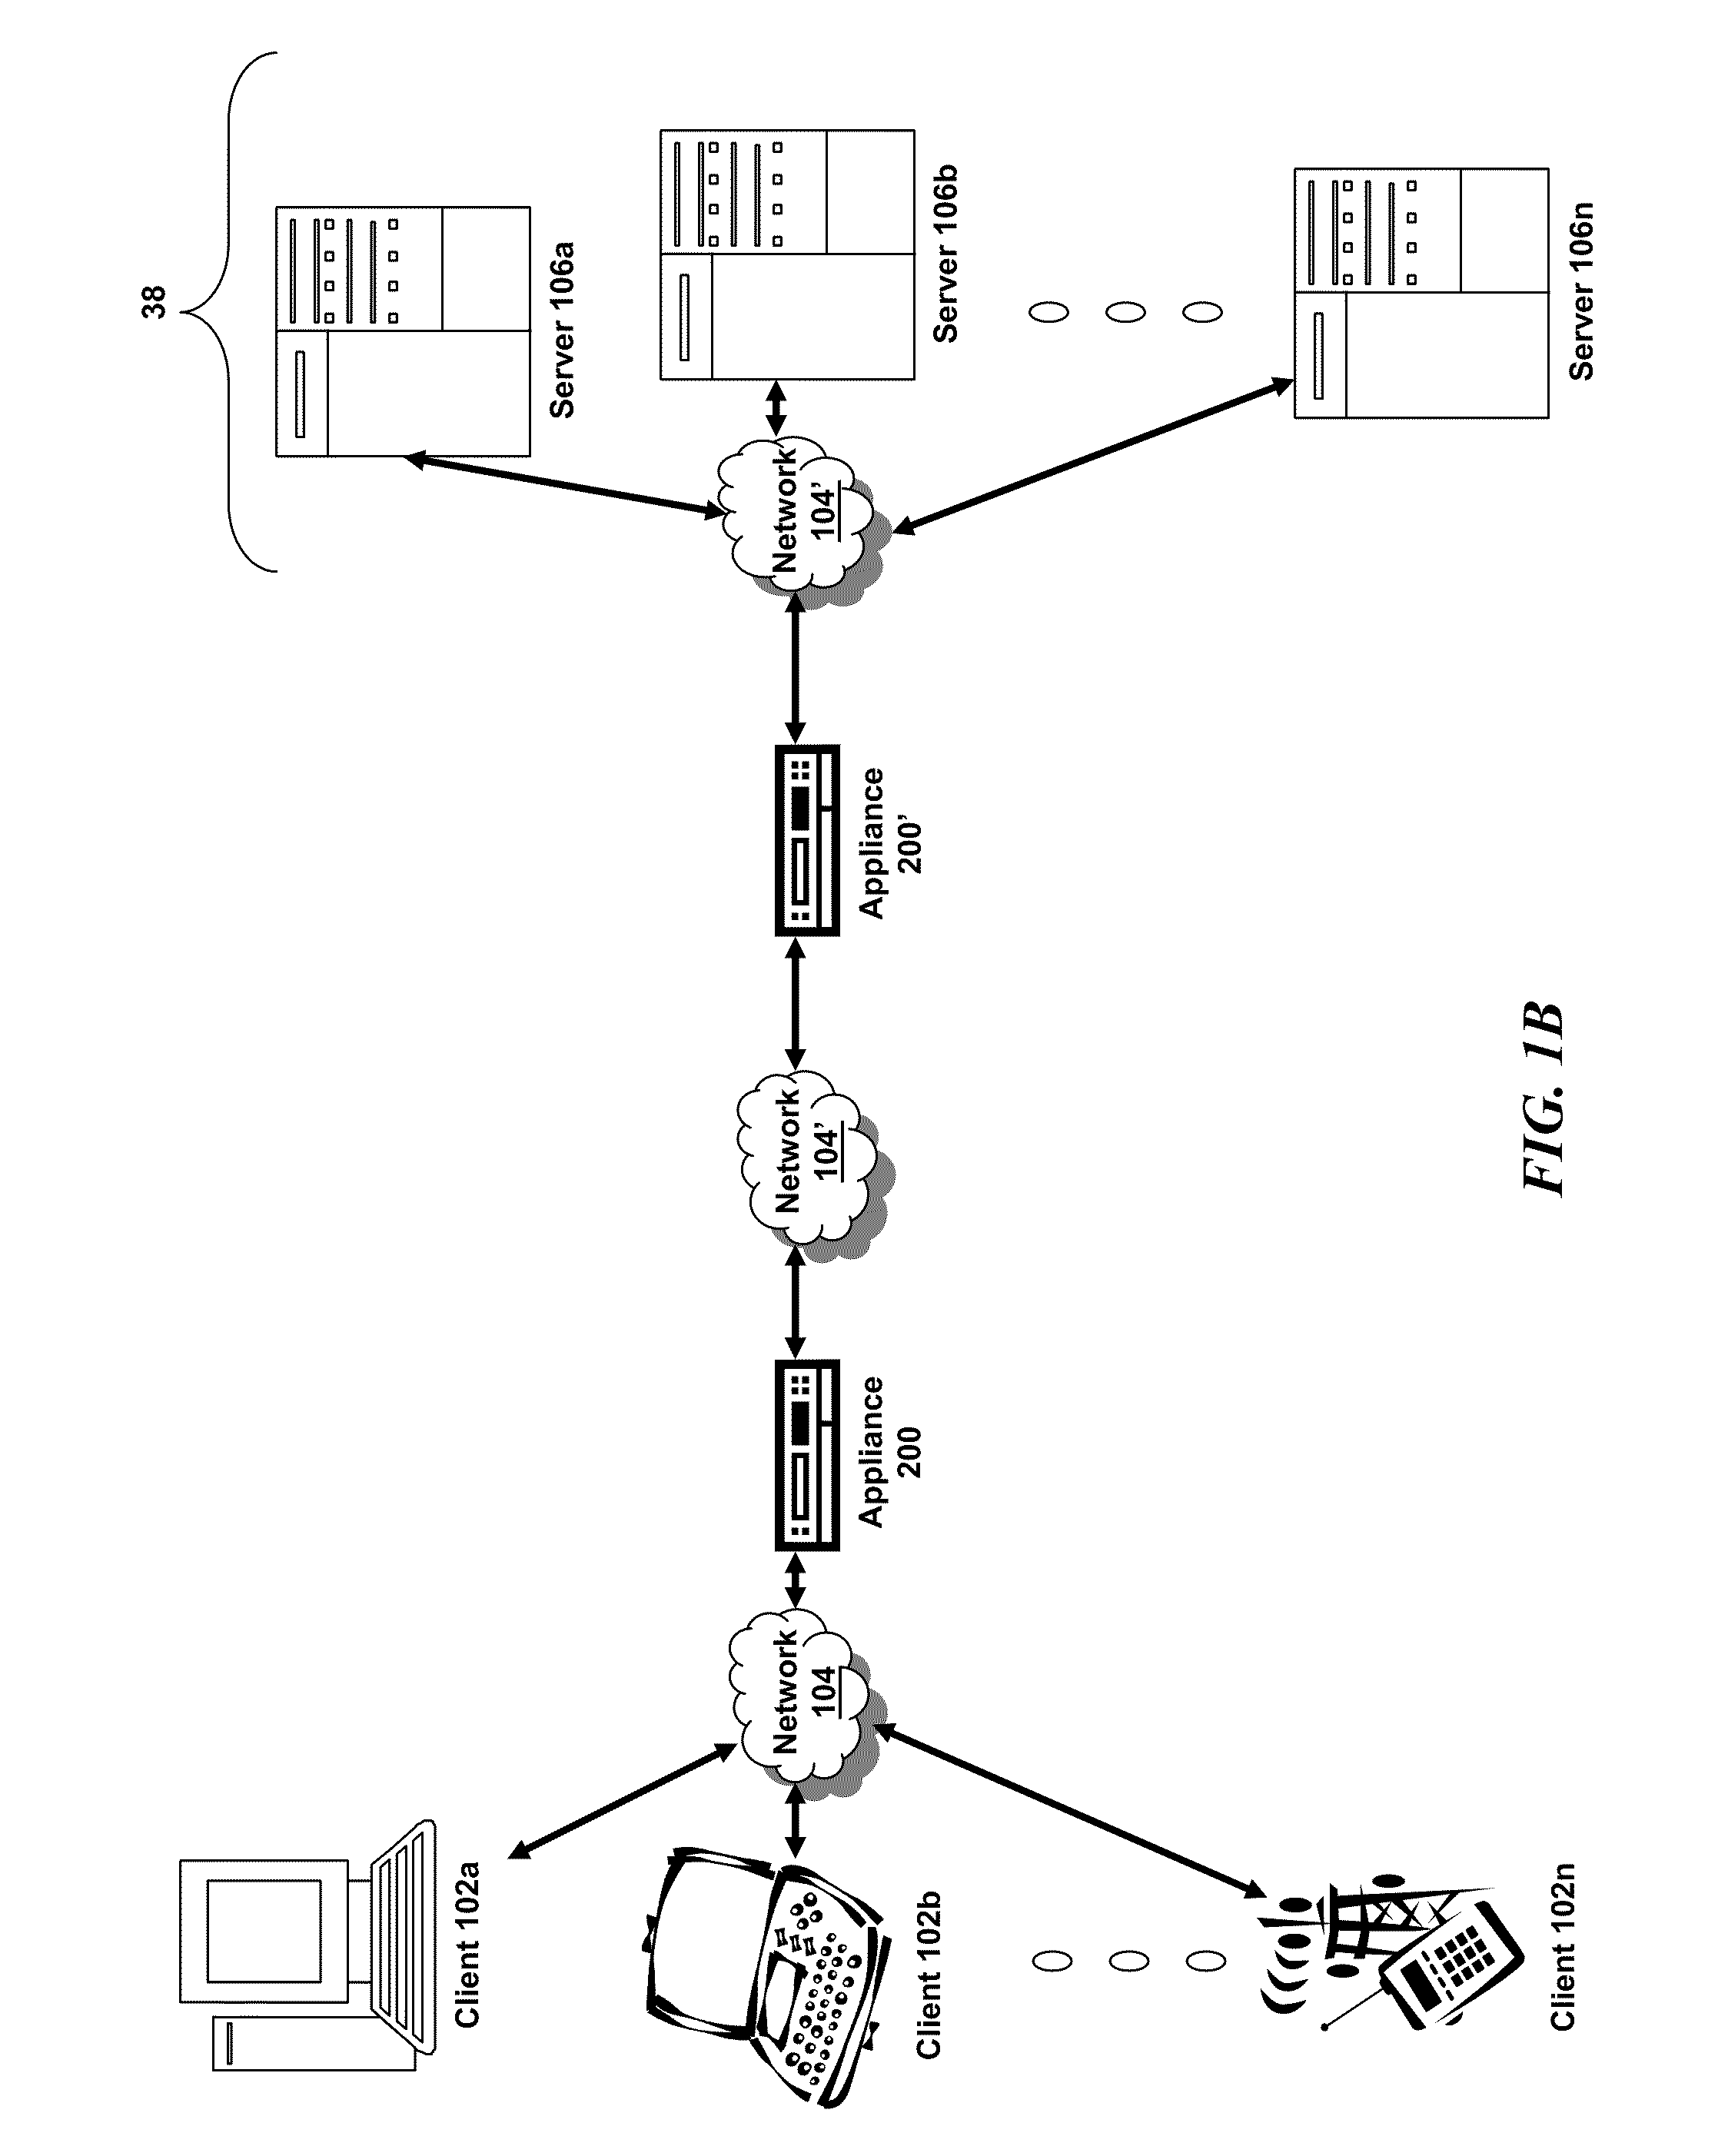 Systems and methods for trace filters by association of client to vserver to services